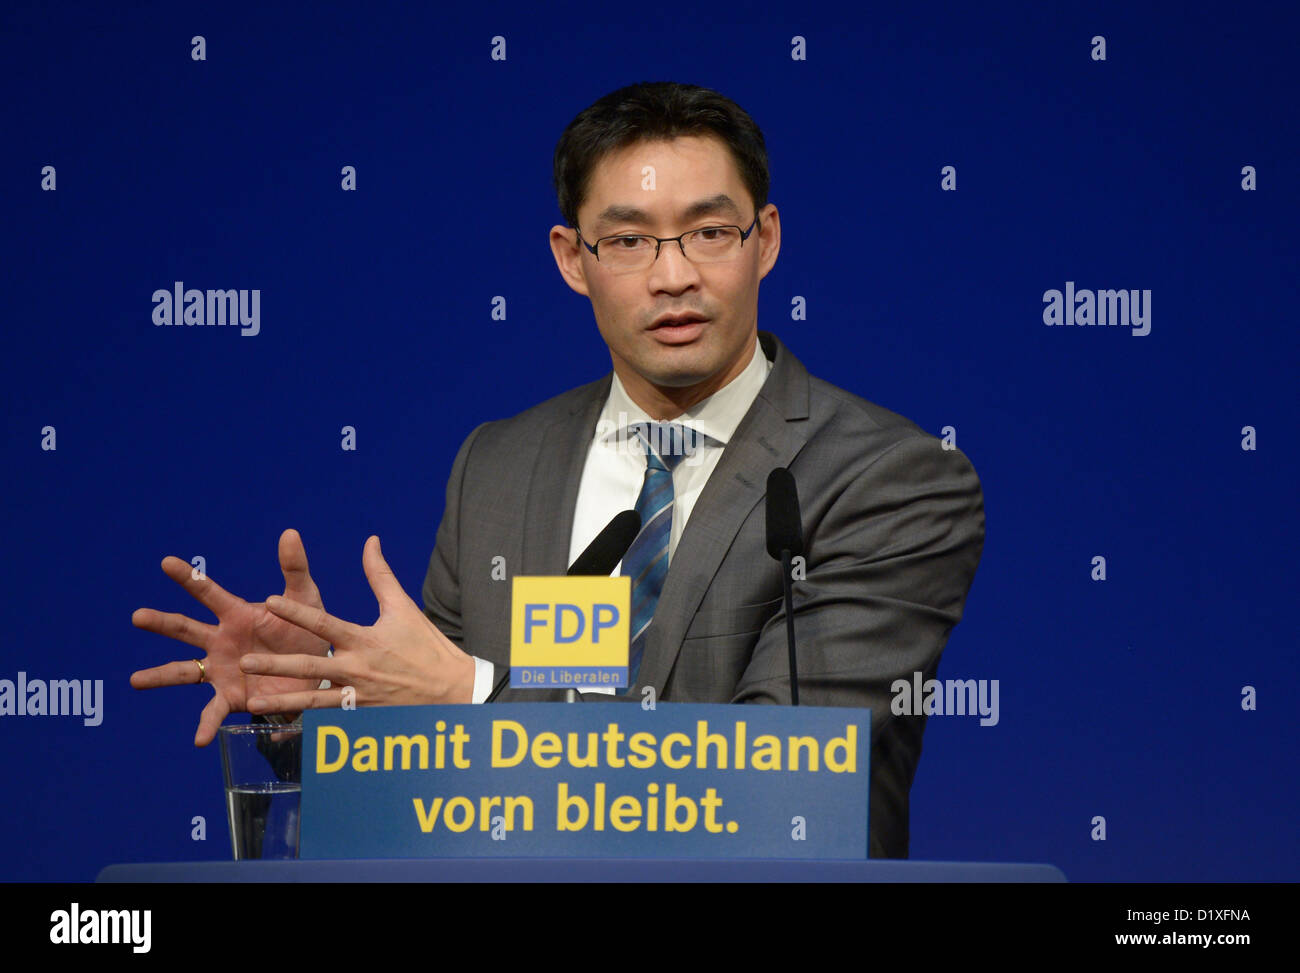 The chairman of the FDP, Philipp Roesler, delivers a speech during the annual Epiphany party conference of the FDP in Stuttgart, Germany, 6 January 2013. Photo: Michael Kappeler Stock Photo